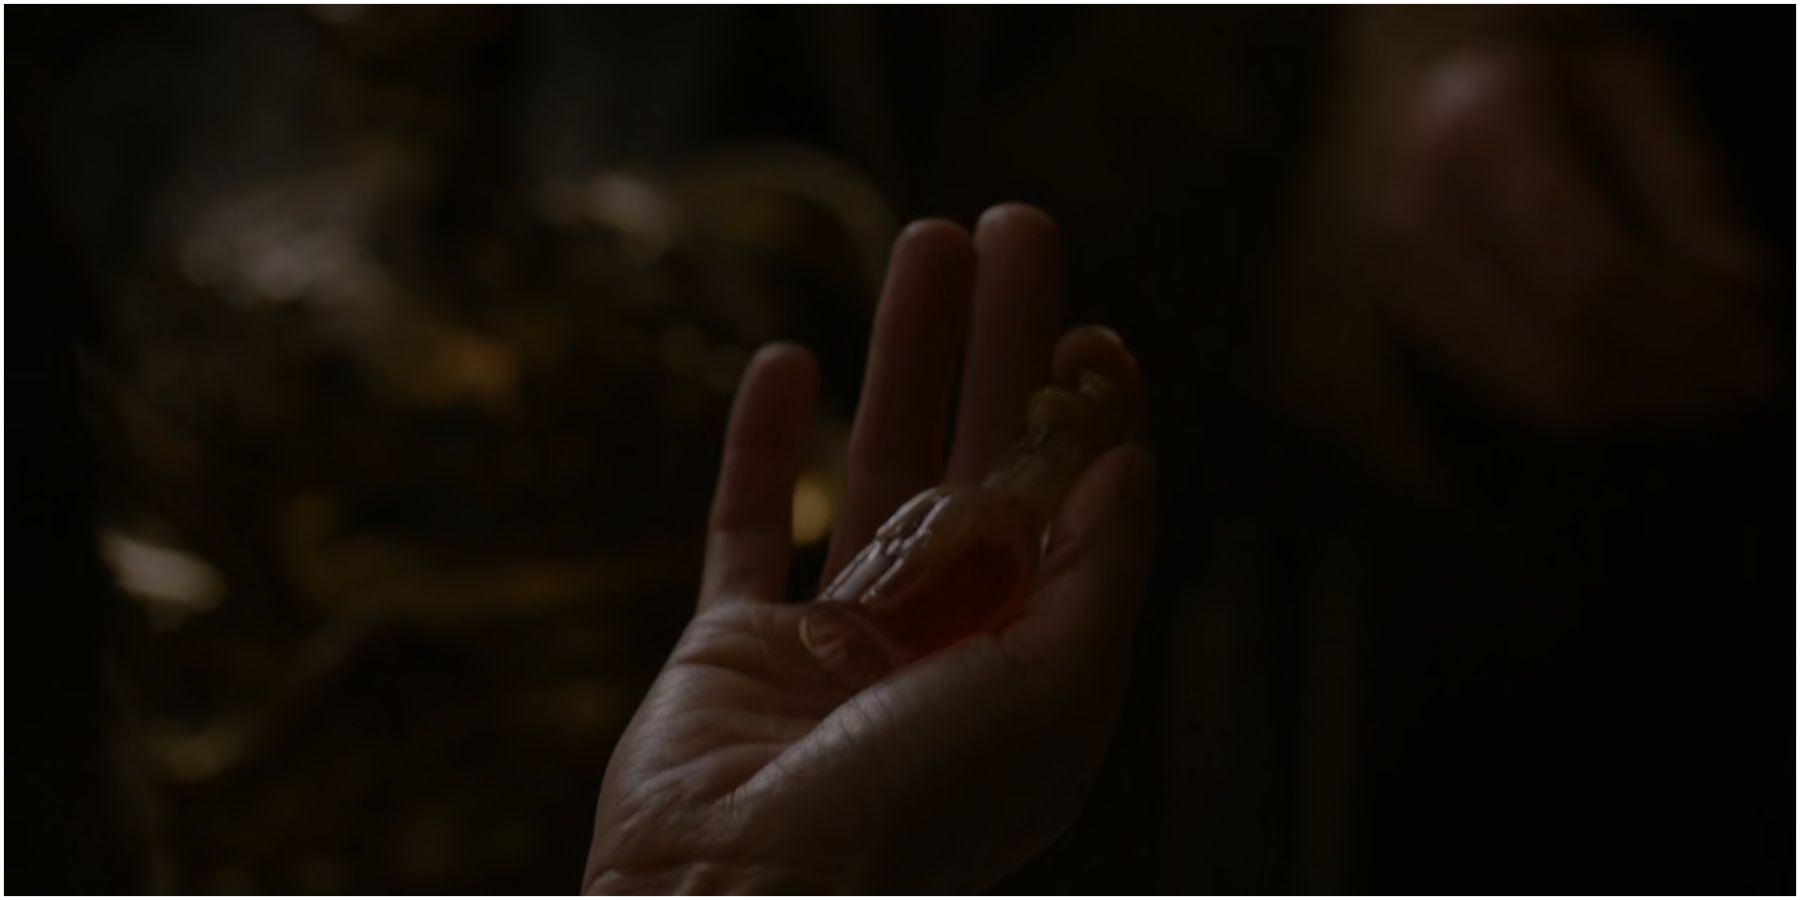 Cersei Lannister holds a vial of Essence of Nightshade in Game of Thrones.